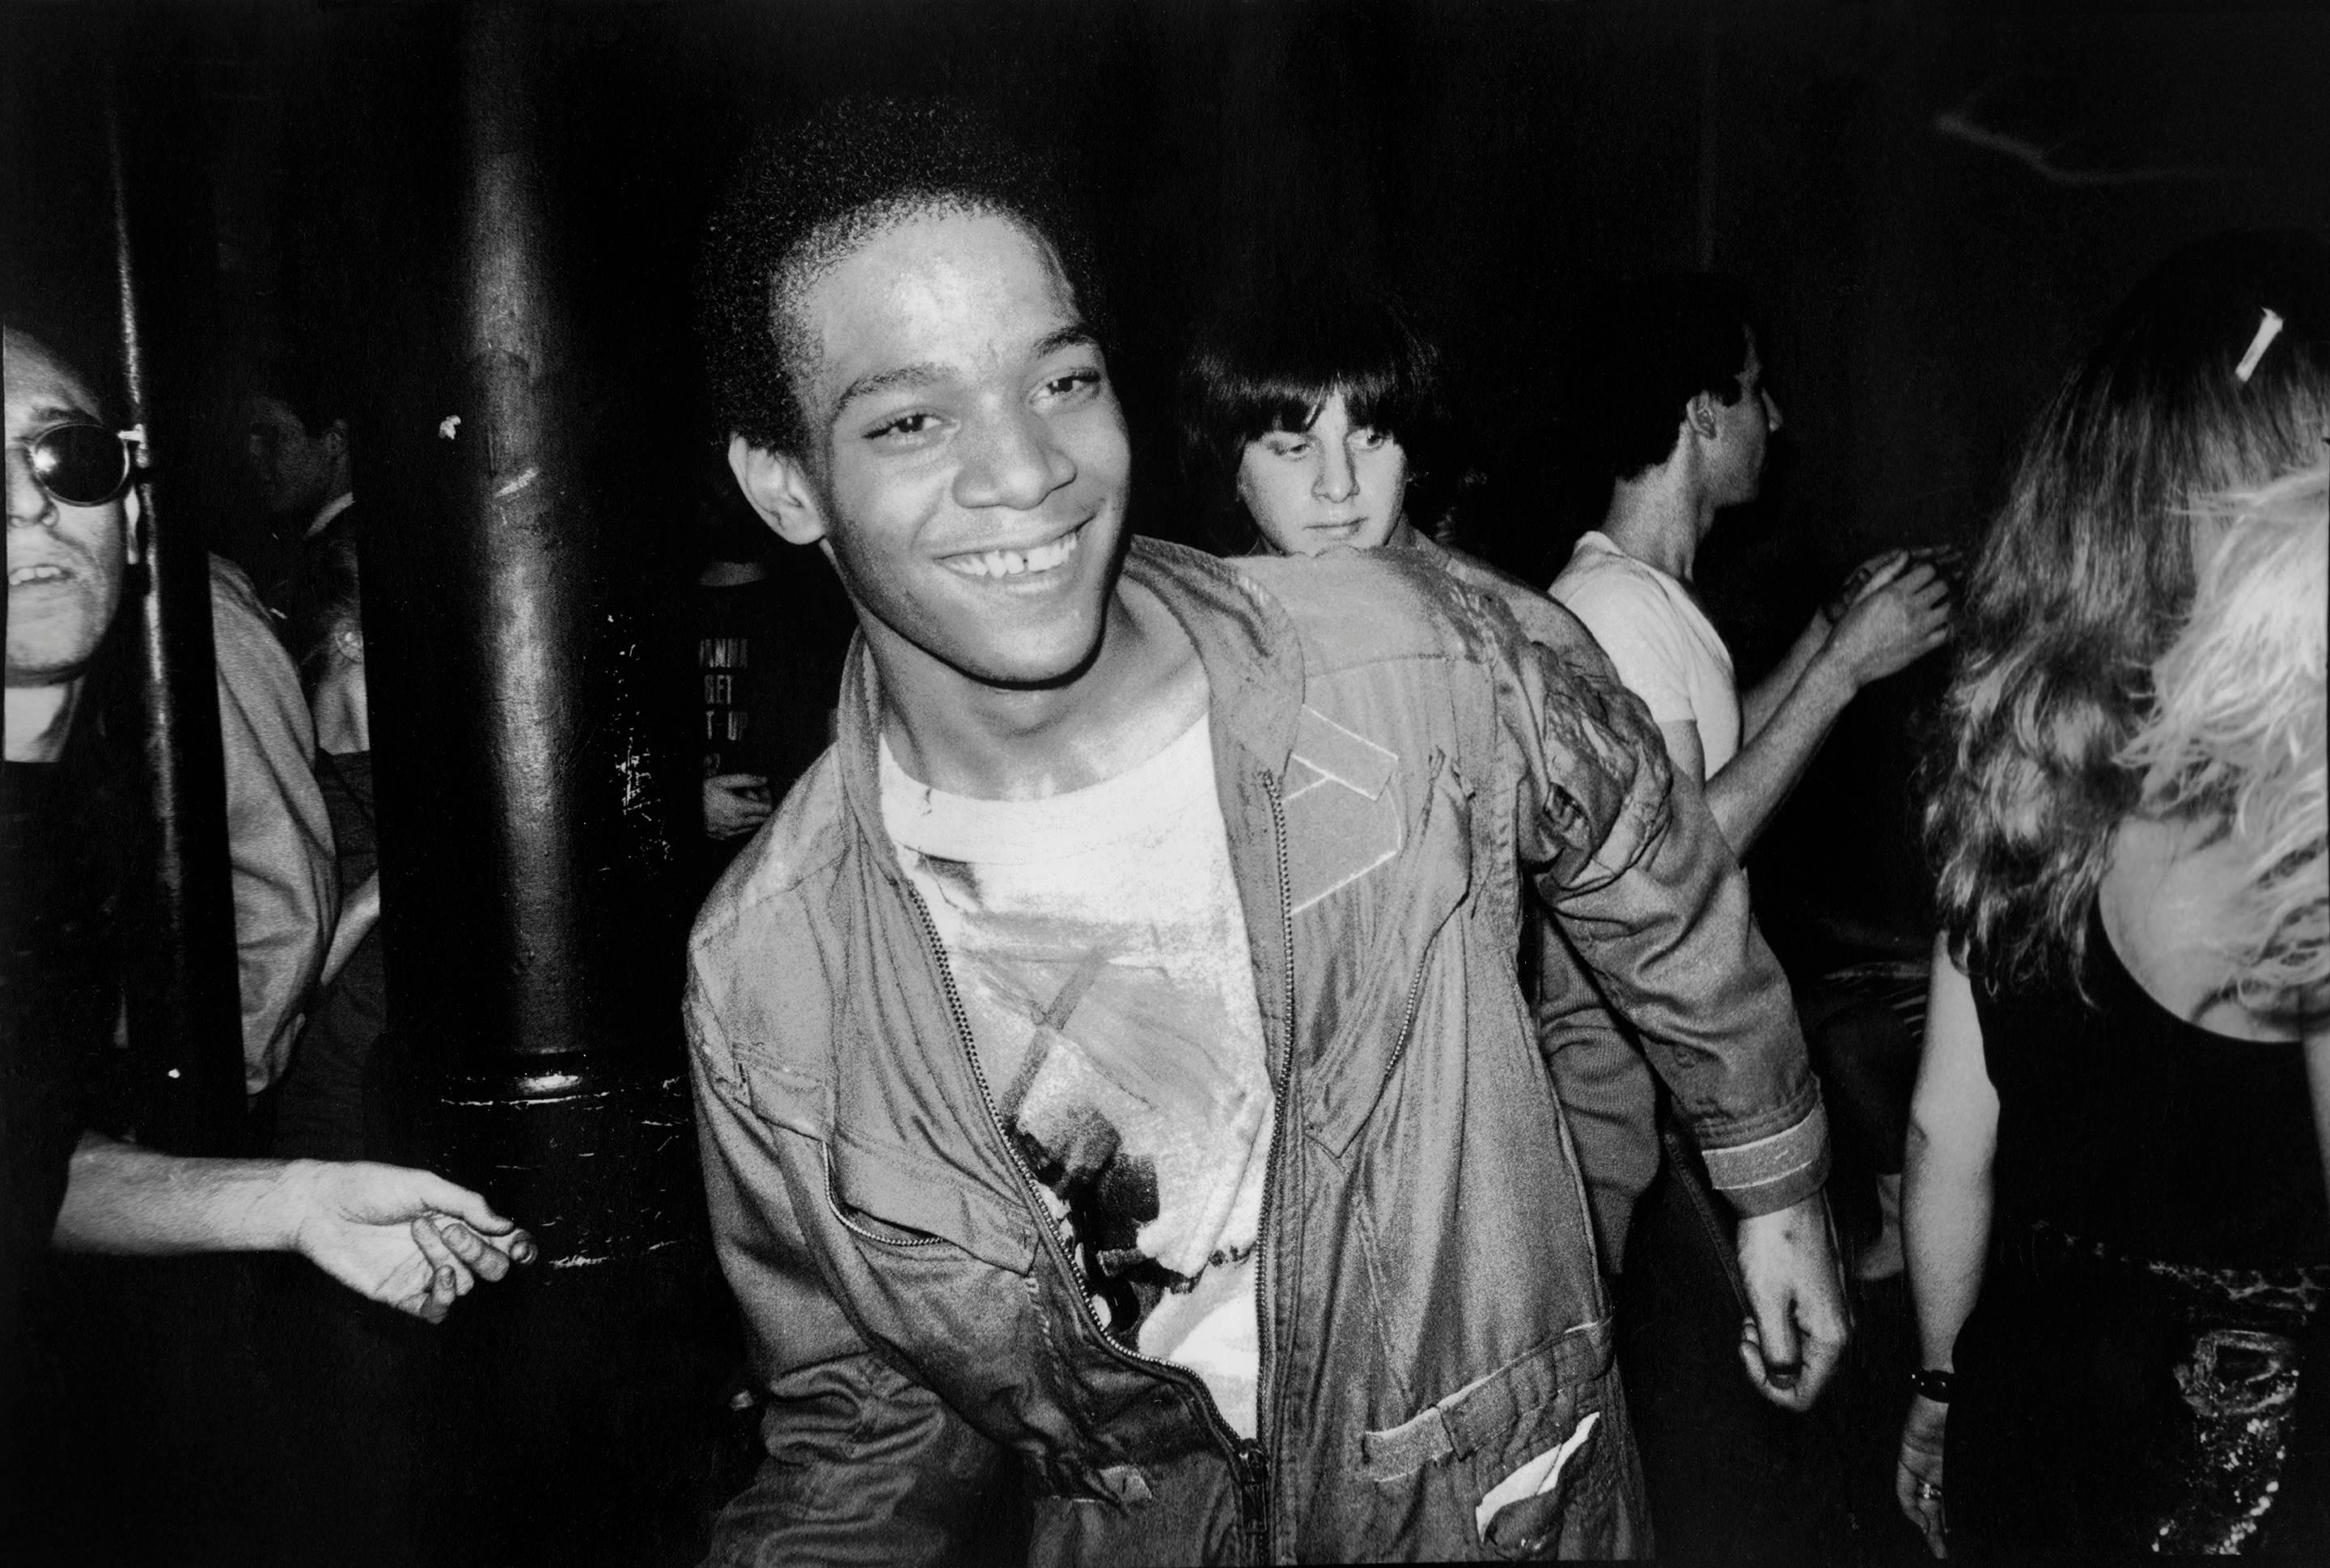 Nicholas Taylor Black and White Photograph - BASQUIAT Dancing at The Mudd Club, 1979 (Boom For Real)